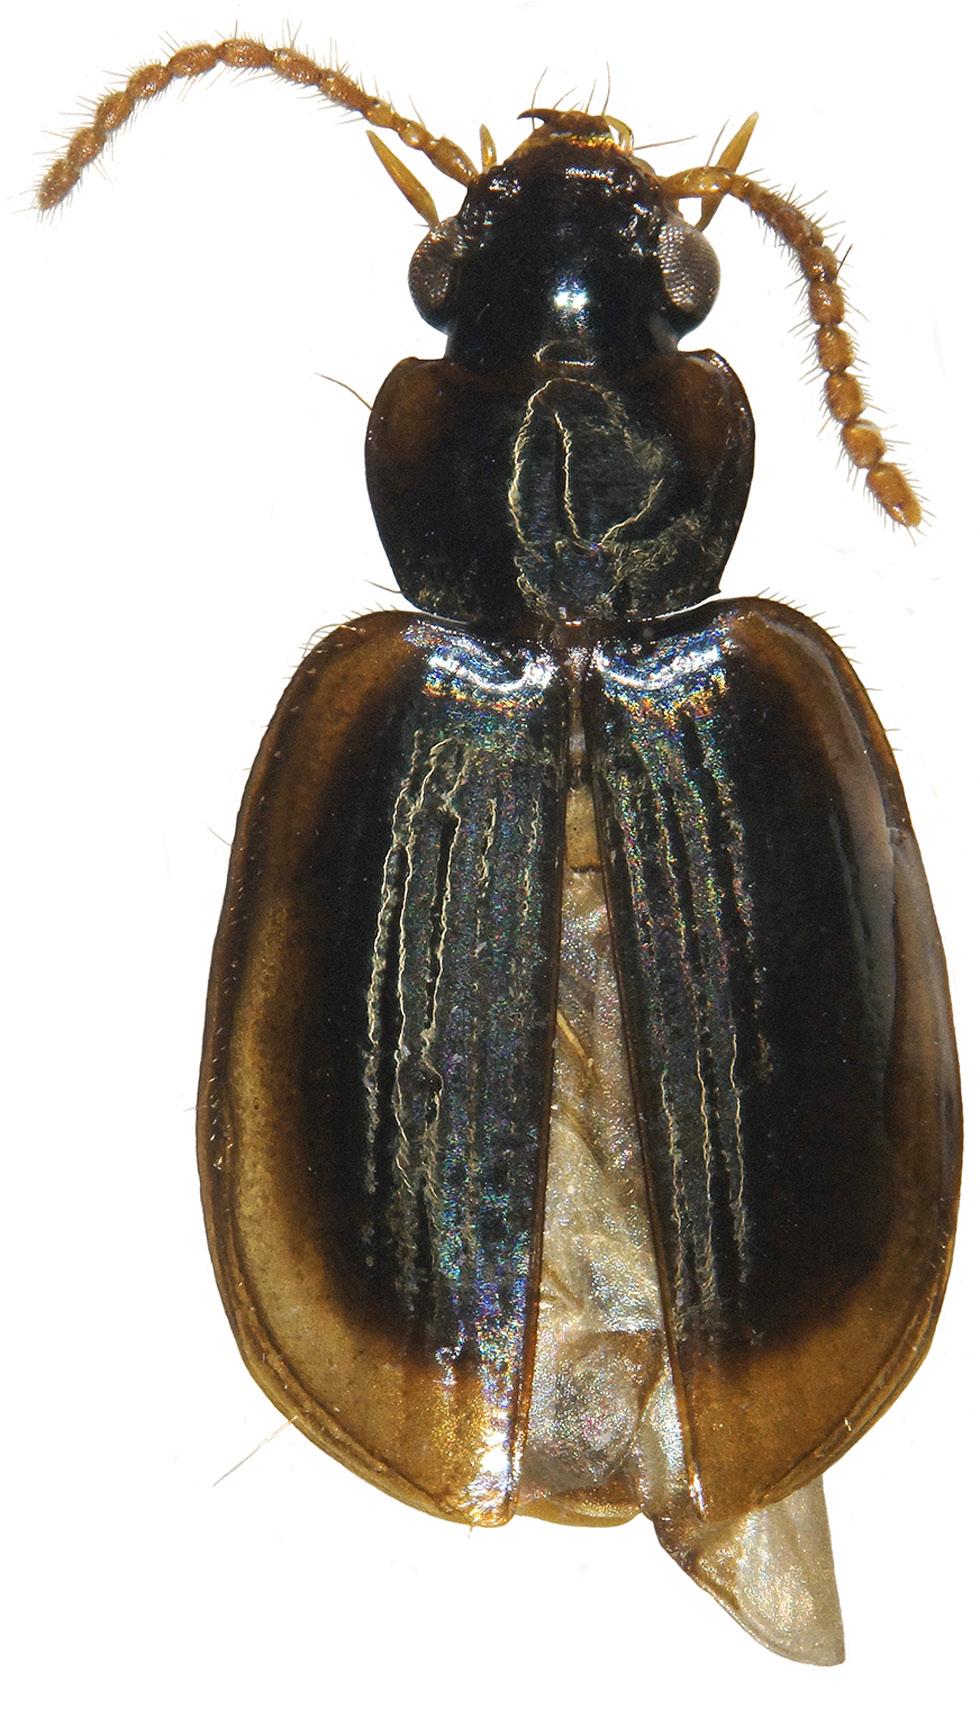 Baehr & Reid: Carabidae of Timore Leste 437 Figure 8. Perigona timorensis sp. nov. (body length 3.7 mm). middle of base not margined, lateral parts of base faintly margined.